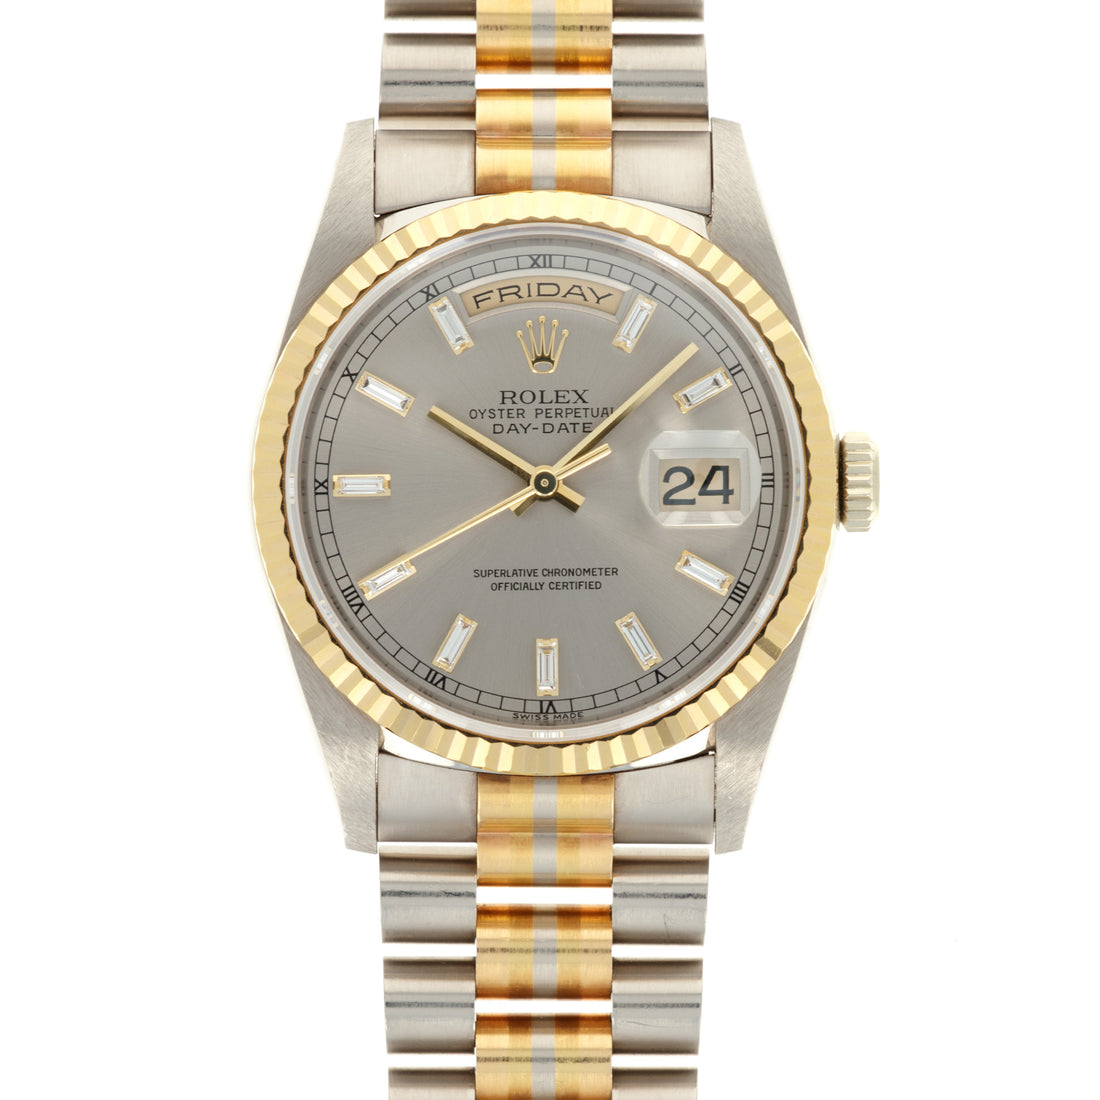 Rolex Tridor Day-Date Ref. 18239 with Baguette Diamond Dial